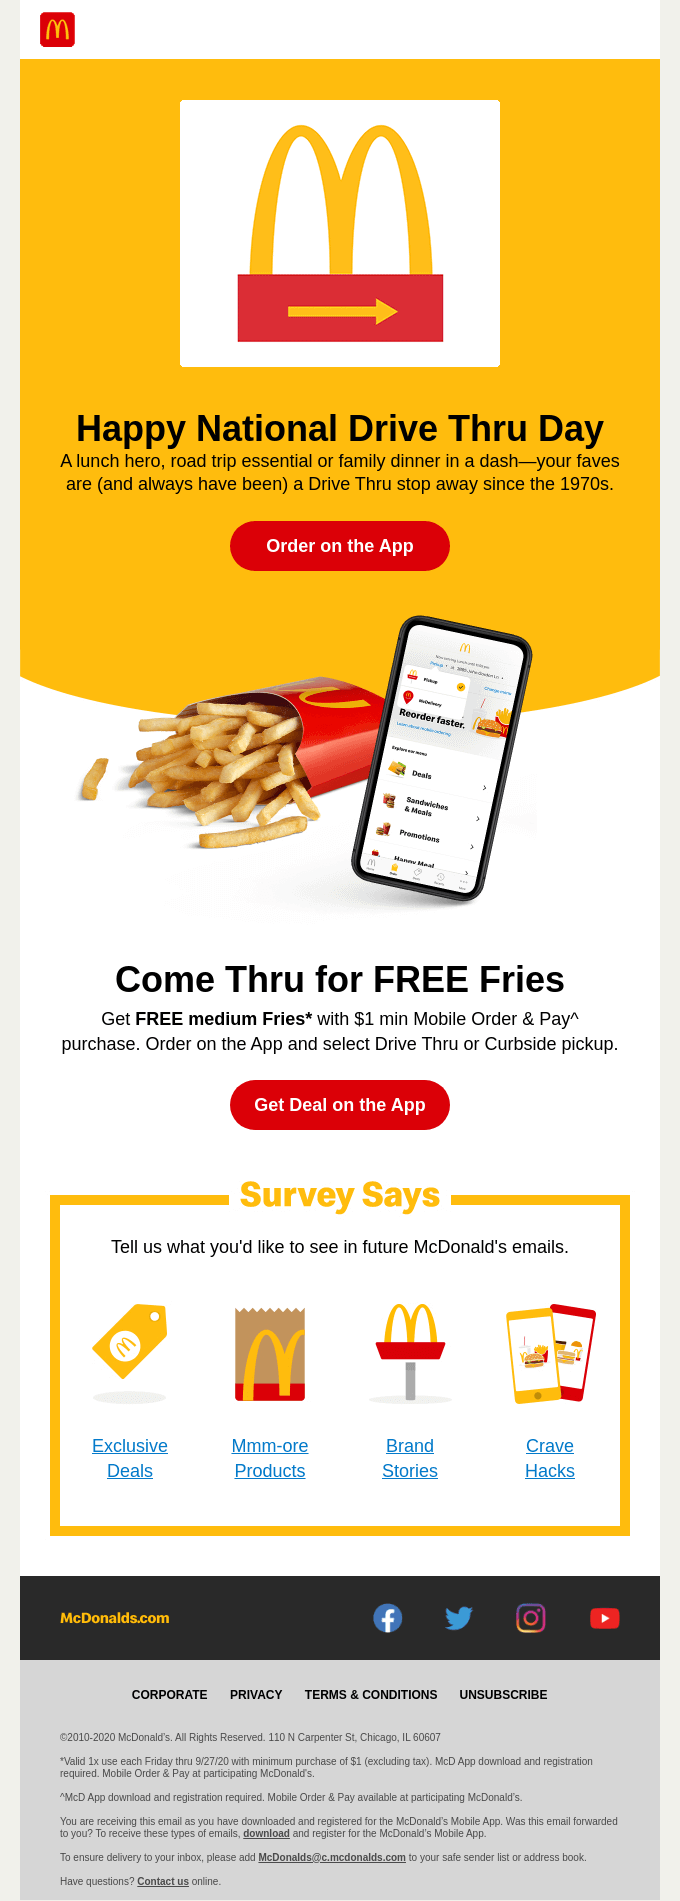 McDonald's use subliminal message in their email campaign